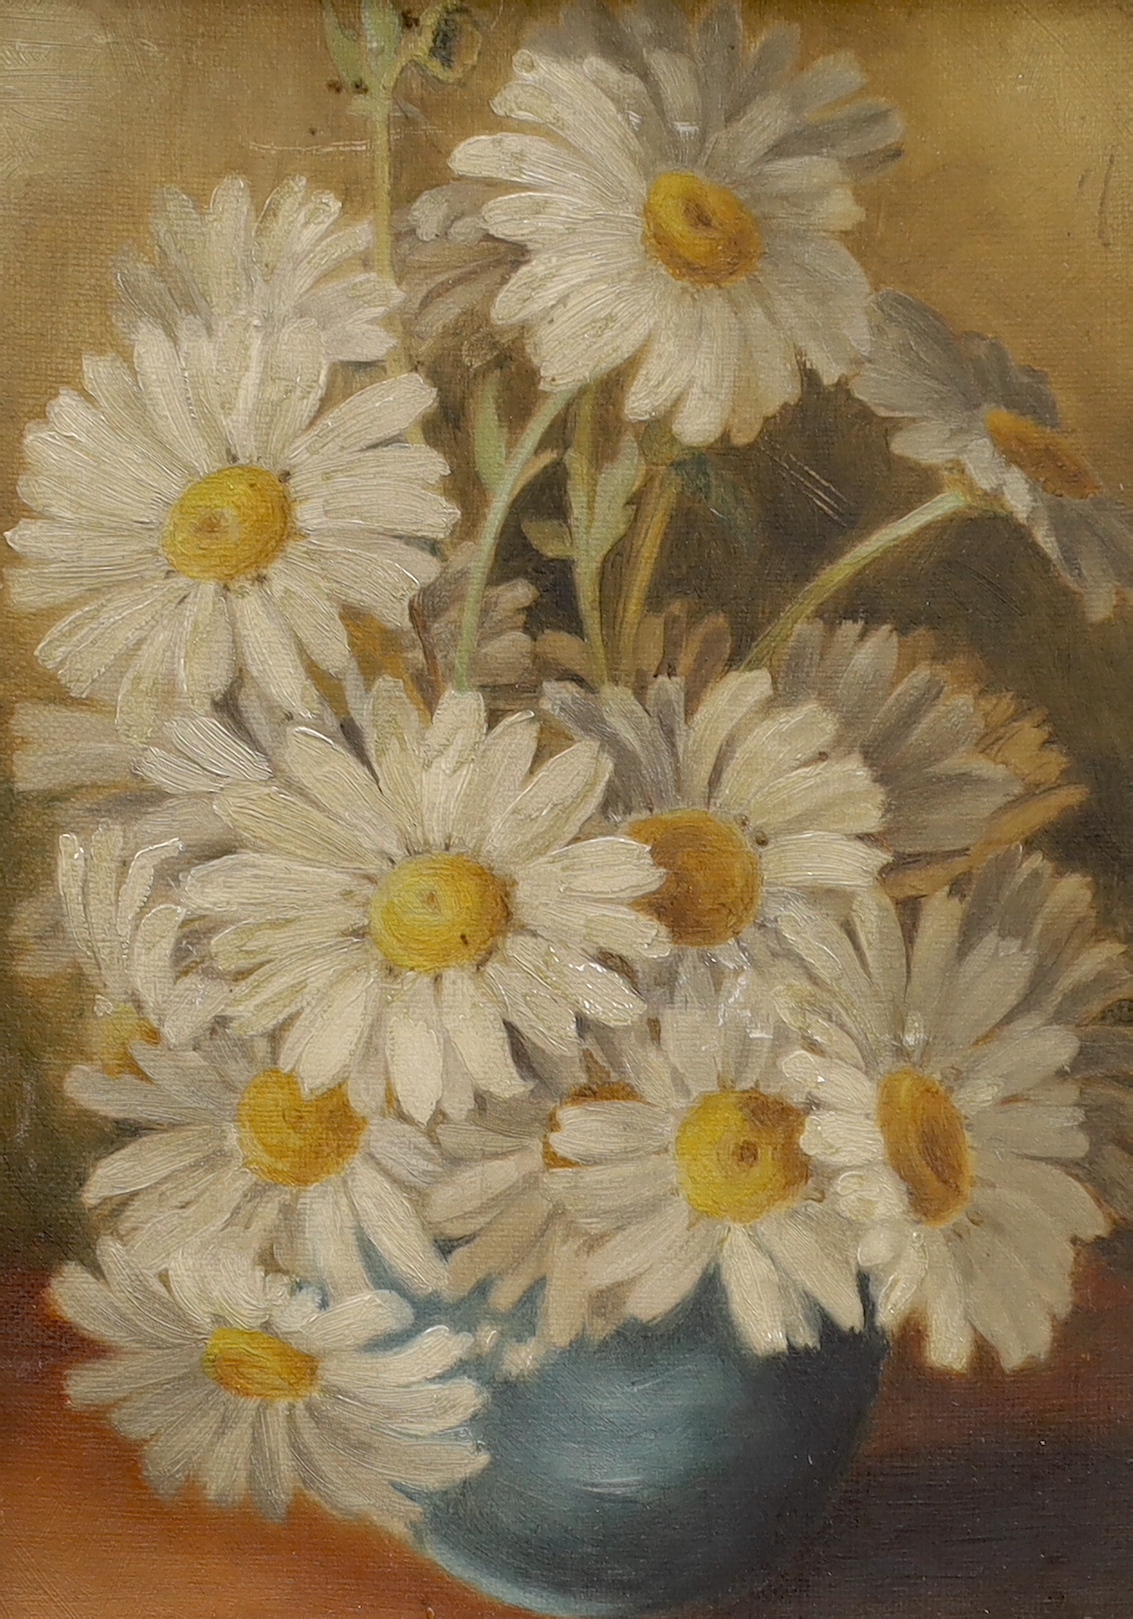 J R Burchell, oil on canvas, Interior scene with young mother cradling her baby, unframed (a.f.) and Modern British School, oil on canvas, Still life of Chrysanthemums in a blue vase, largest 23 x 18cm